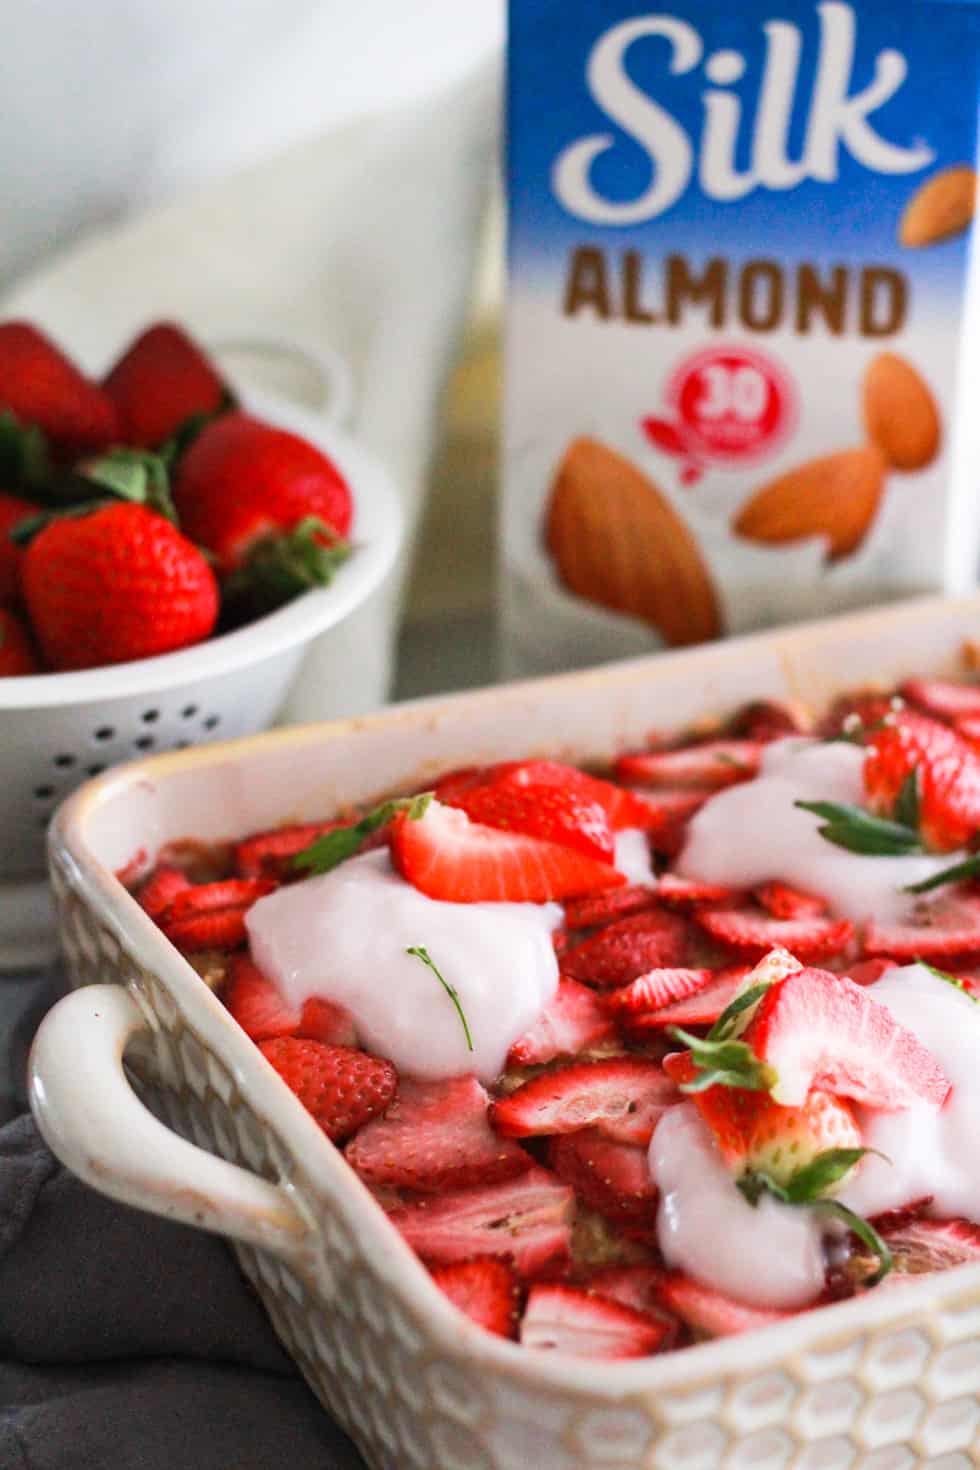 Vegan baked oatmeal in a white dish with fresh strawberries and a carton of Silk almond milk.